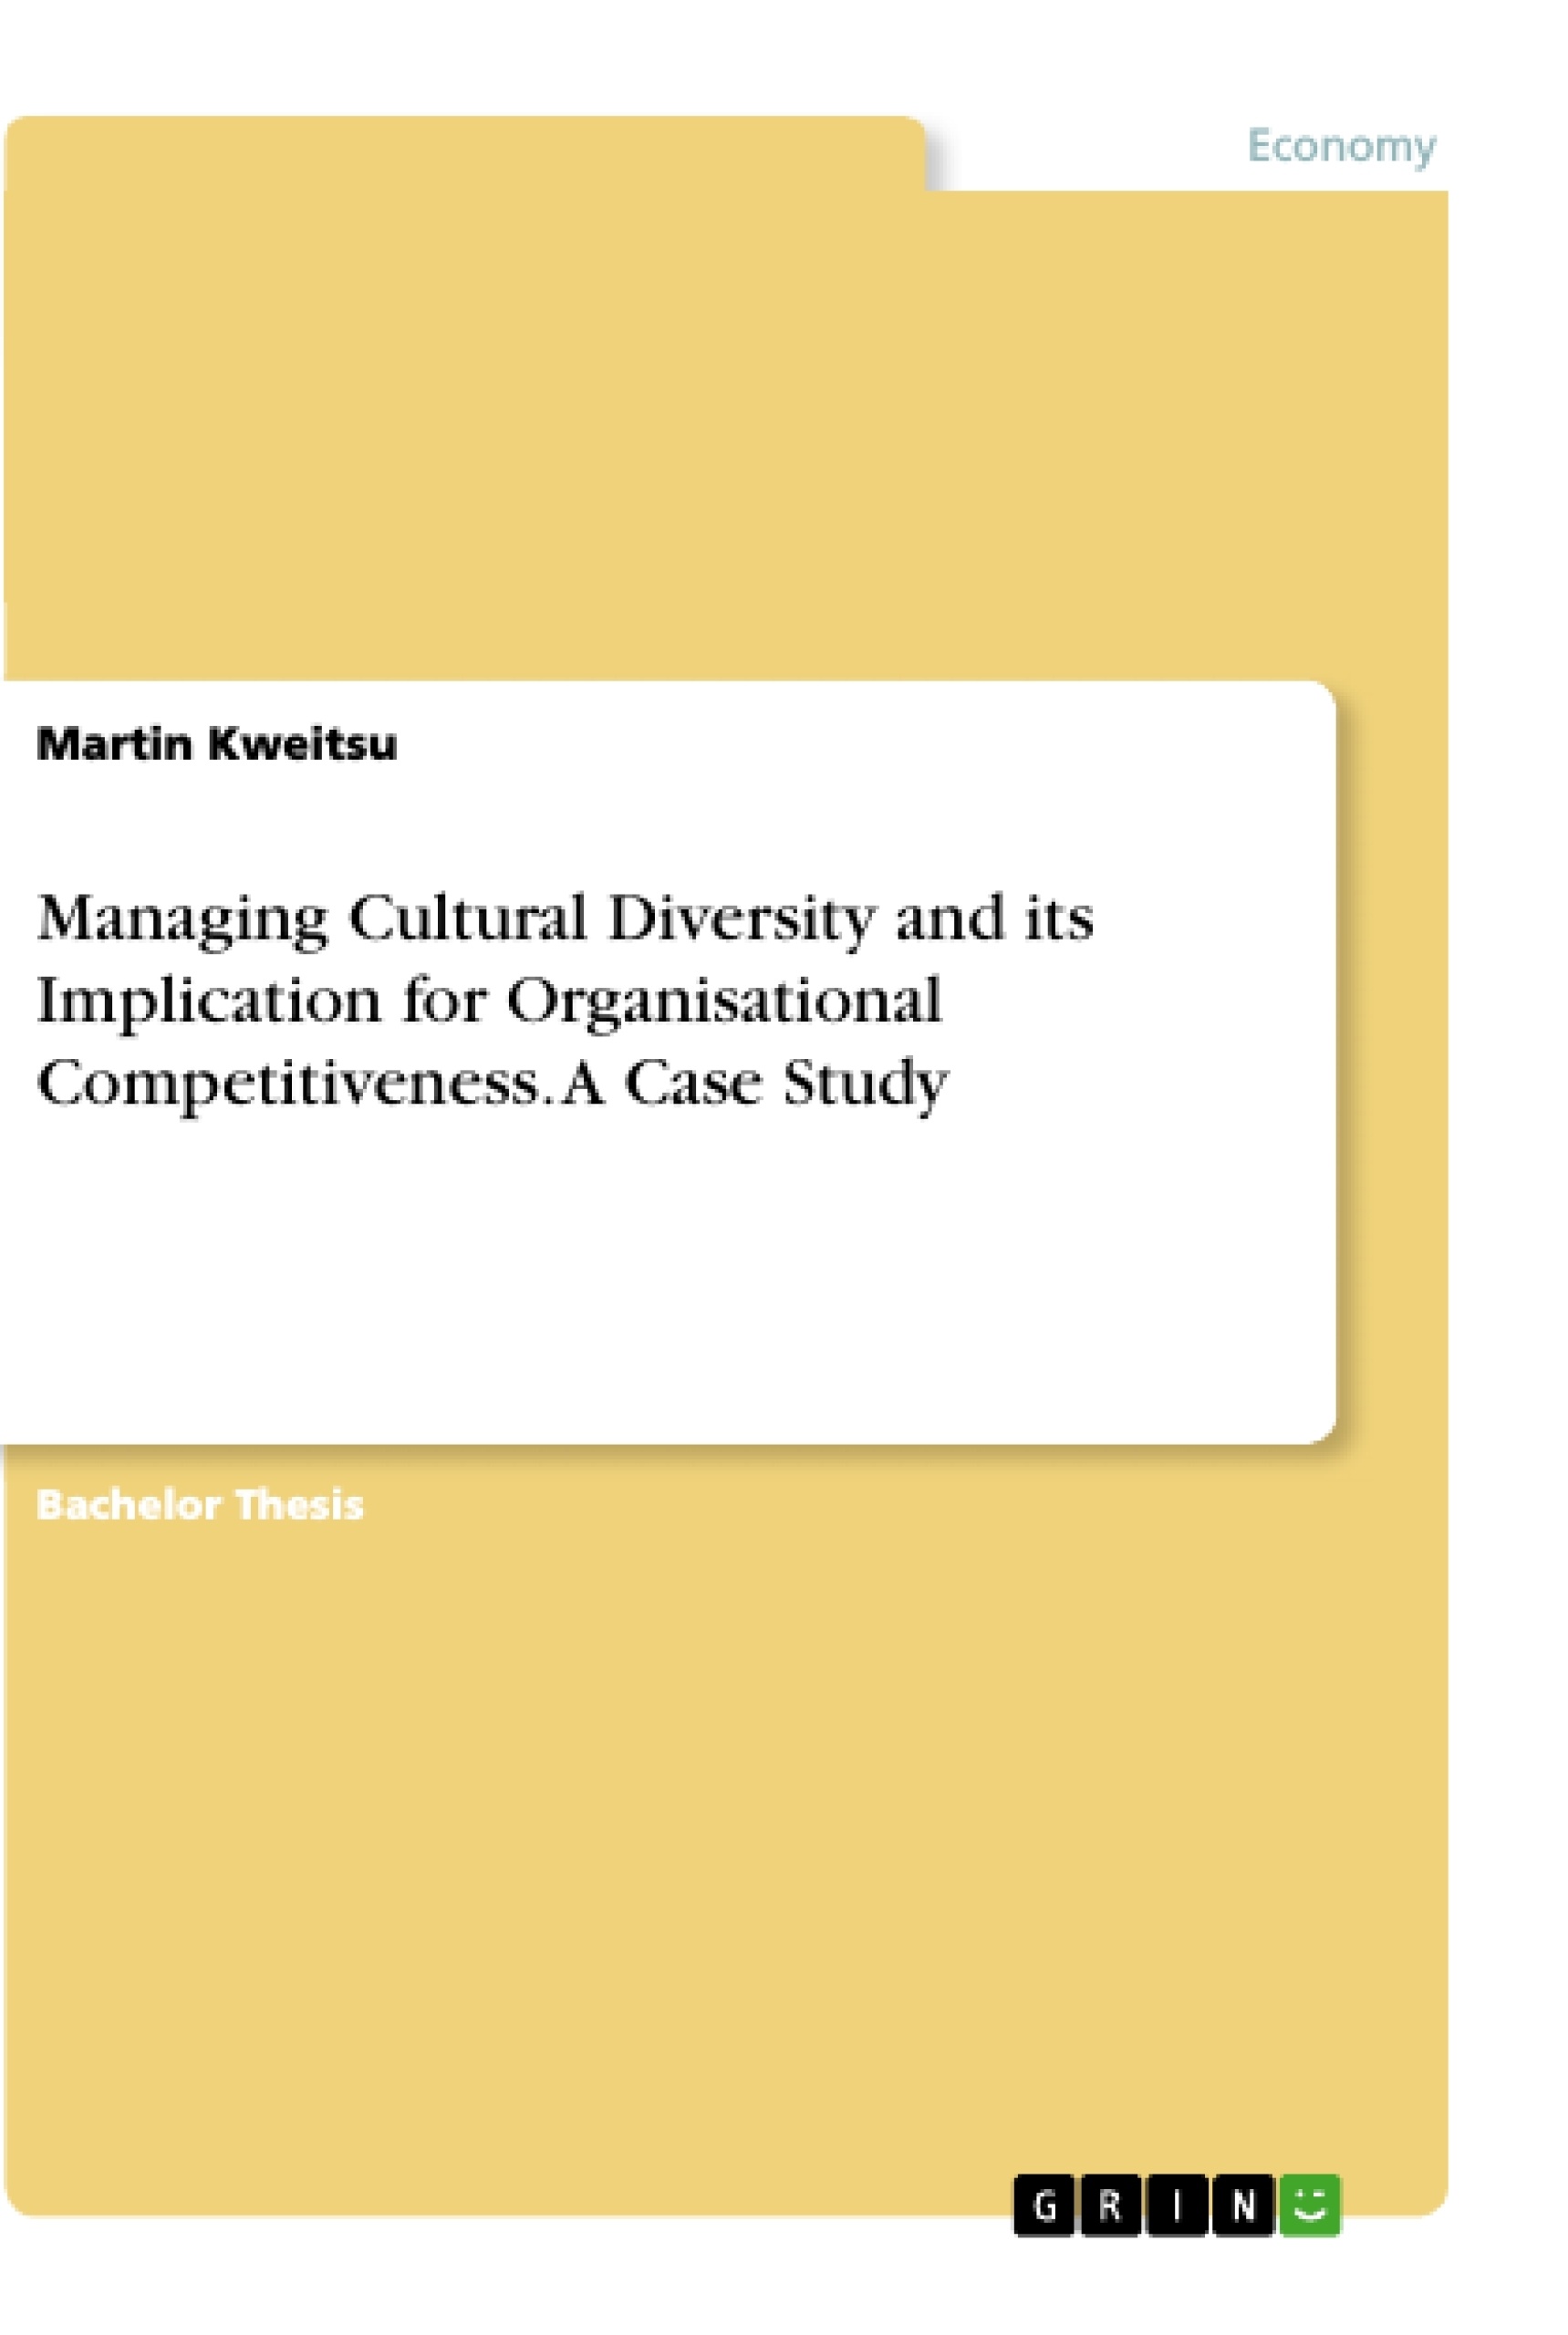 Title: Managing Cultural Diversity and its Implication for Organisational Competitiveness. A Case Study